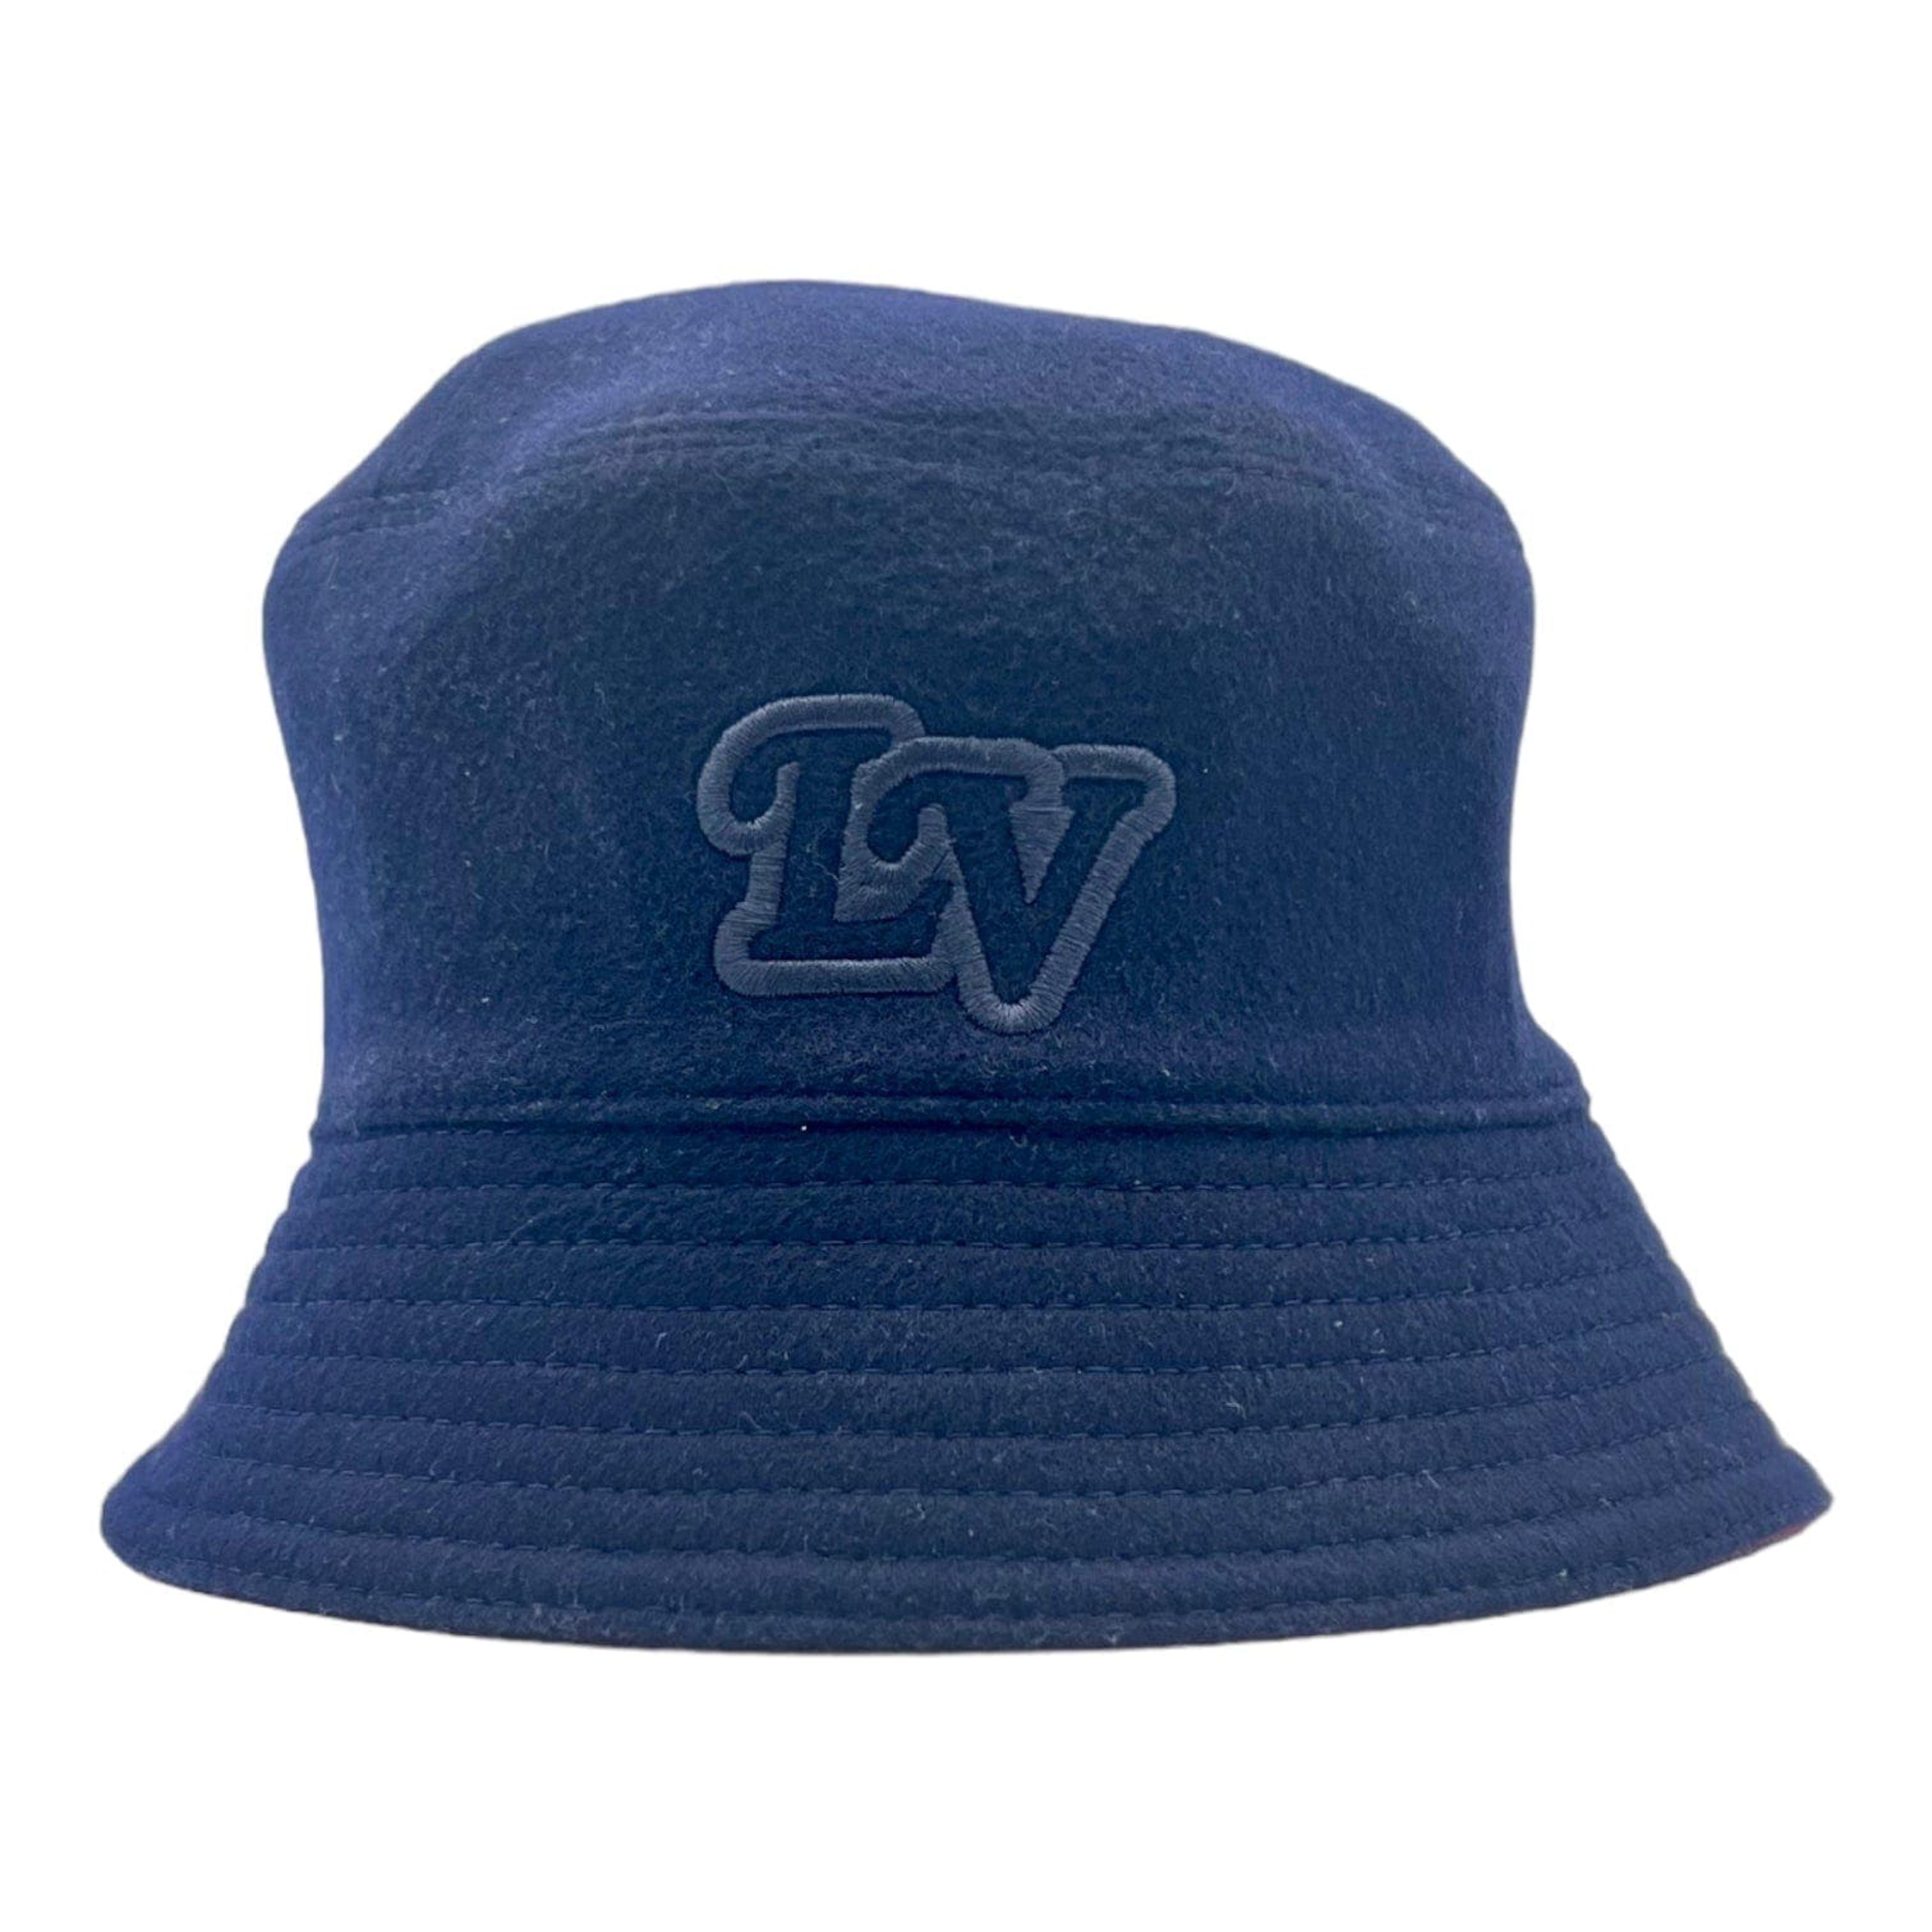 Alternate View 3 of Louis Vuitton Monogram Record Bucket Hat Red Navy Pre-Owned